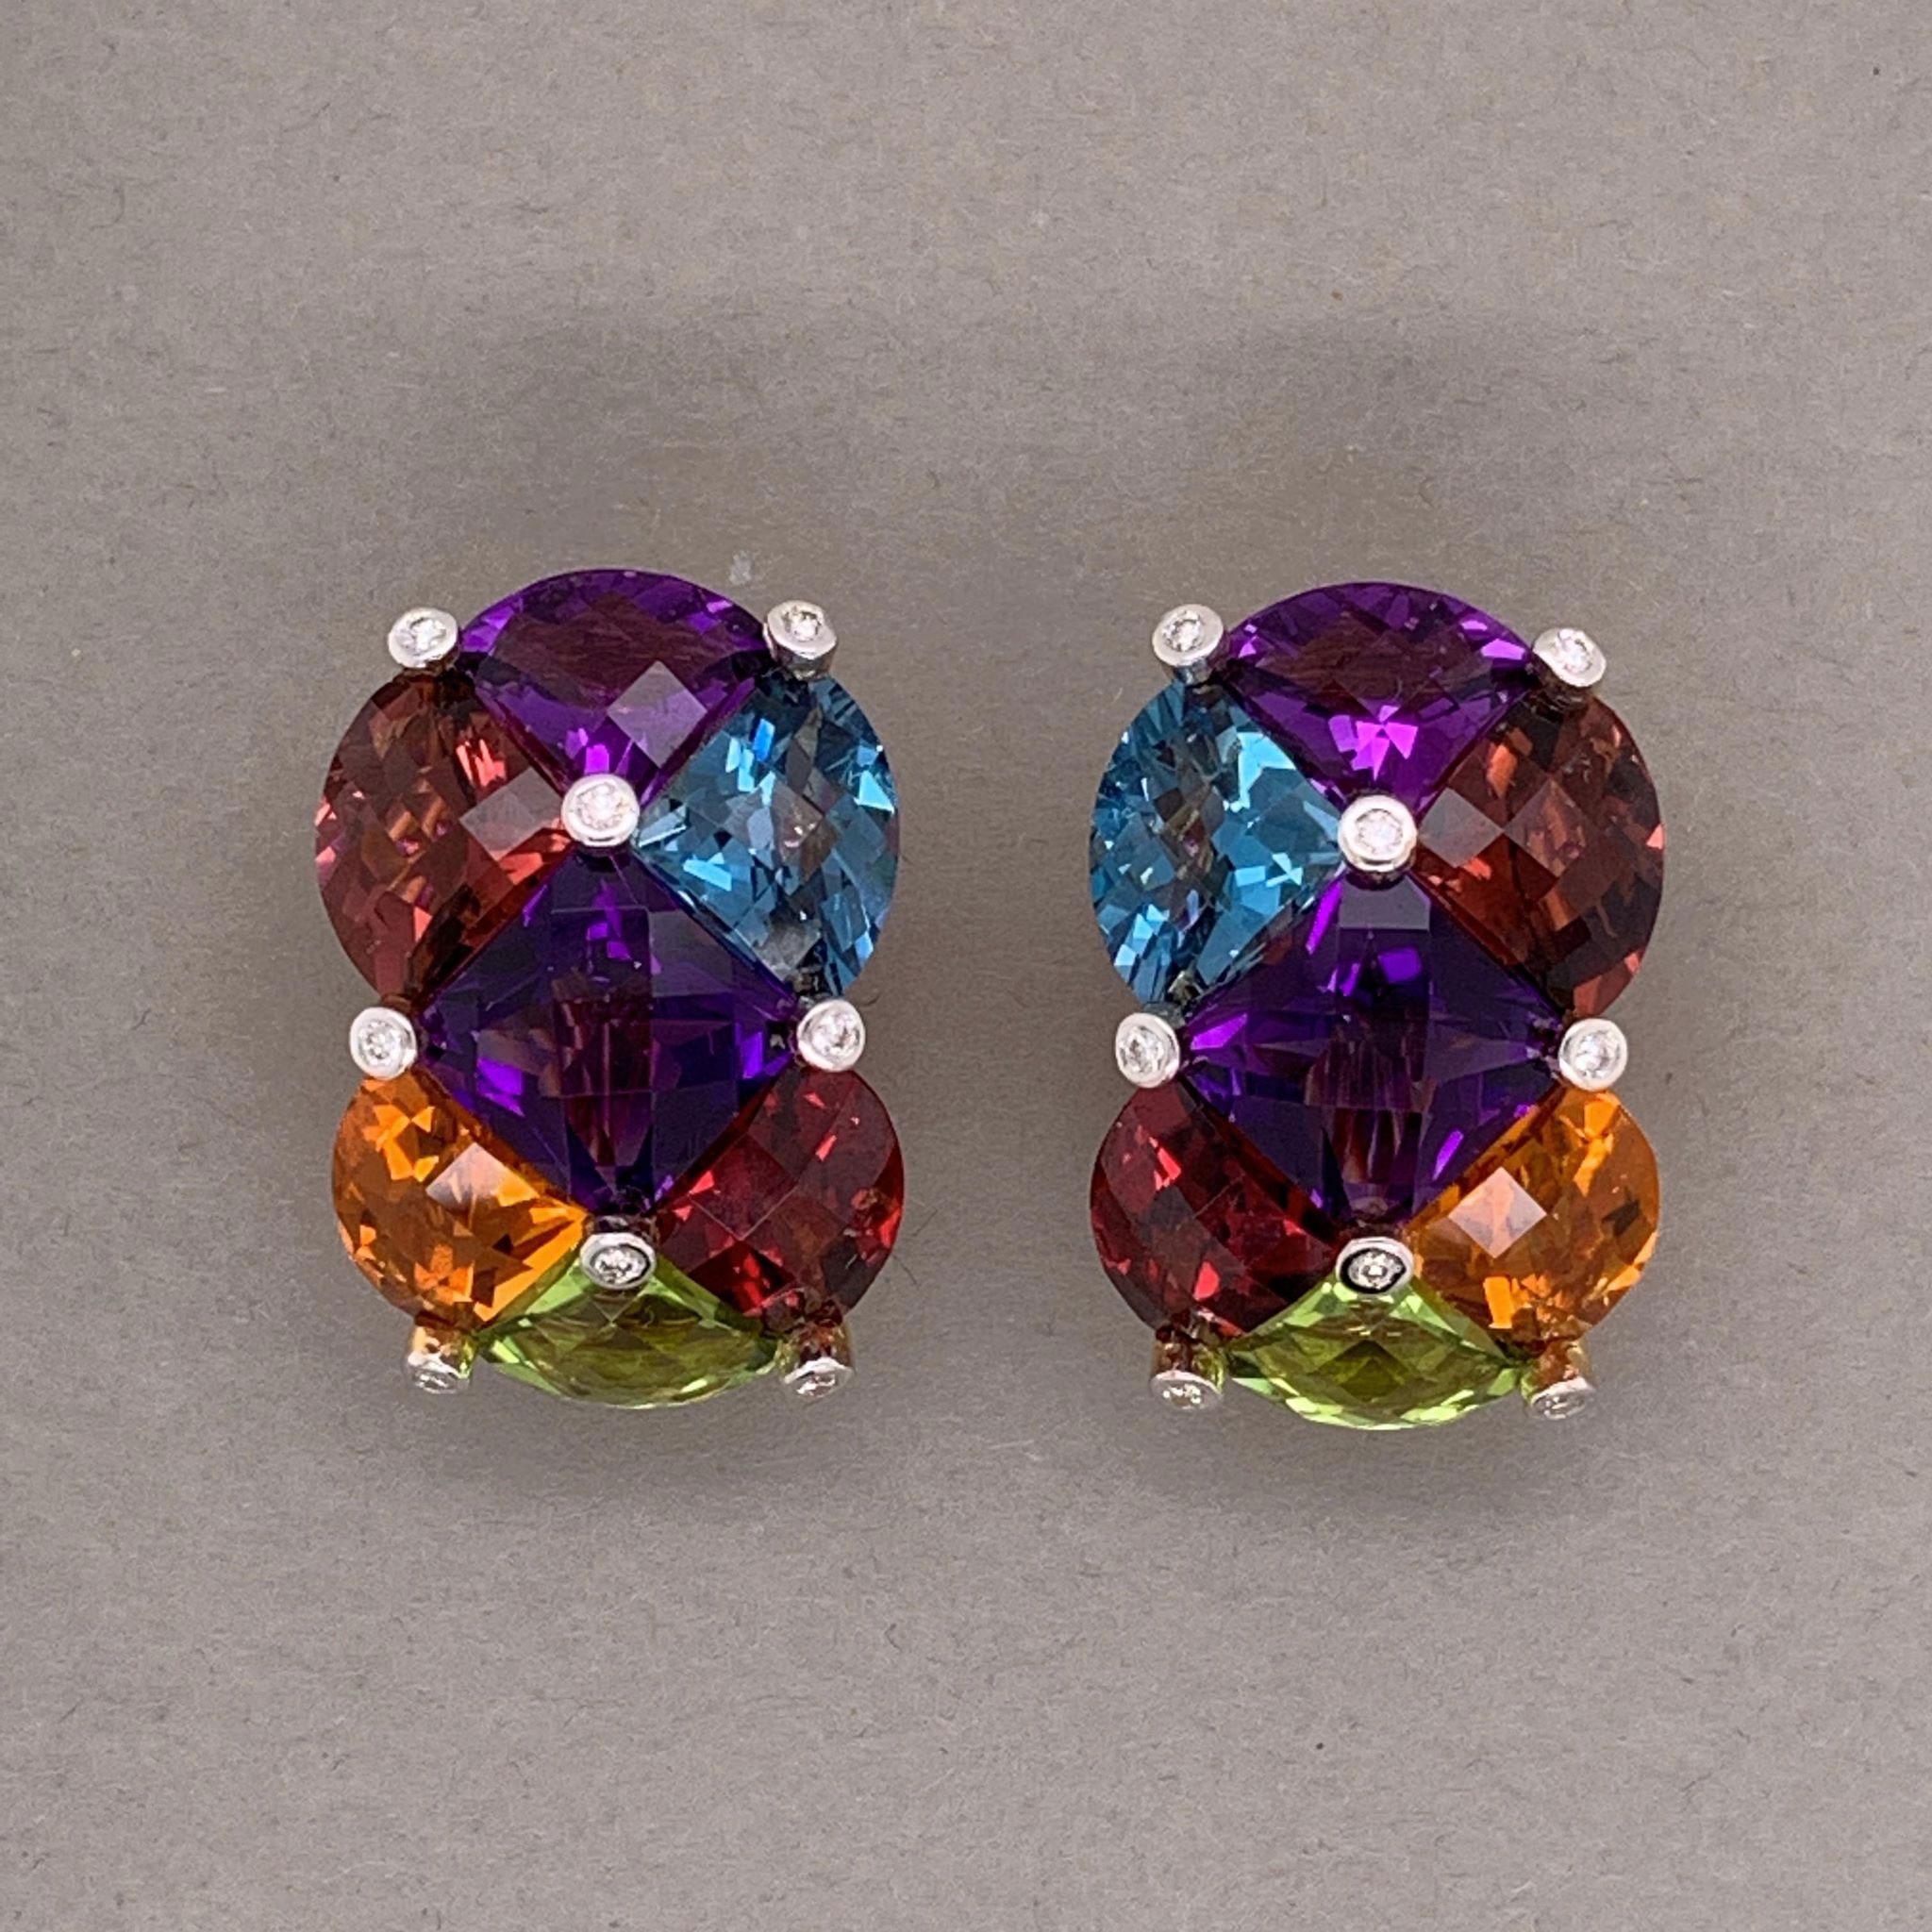 A Bellarri original, these earrings epitomize the Italian designers creativity and use of color. These earrings feature 14.71 carats of multi-colored gemstones including amethyst, topaz, citrine and peridot. They are set in 18k yellow gold with 0.12